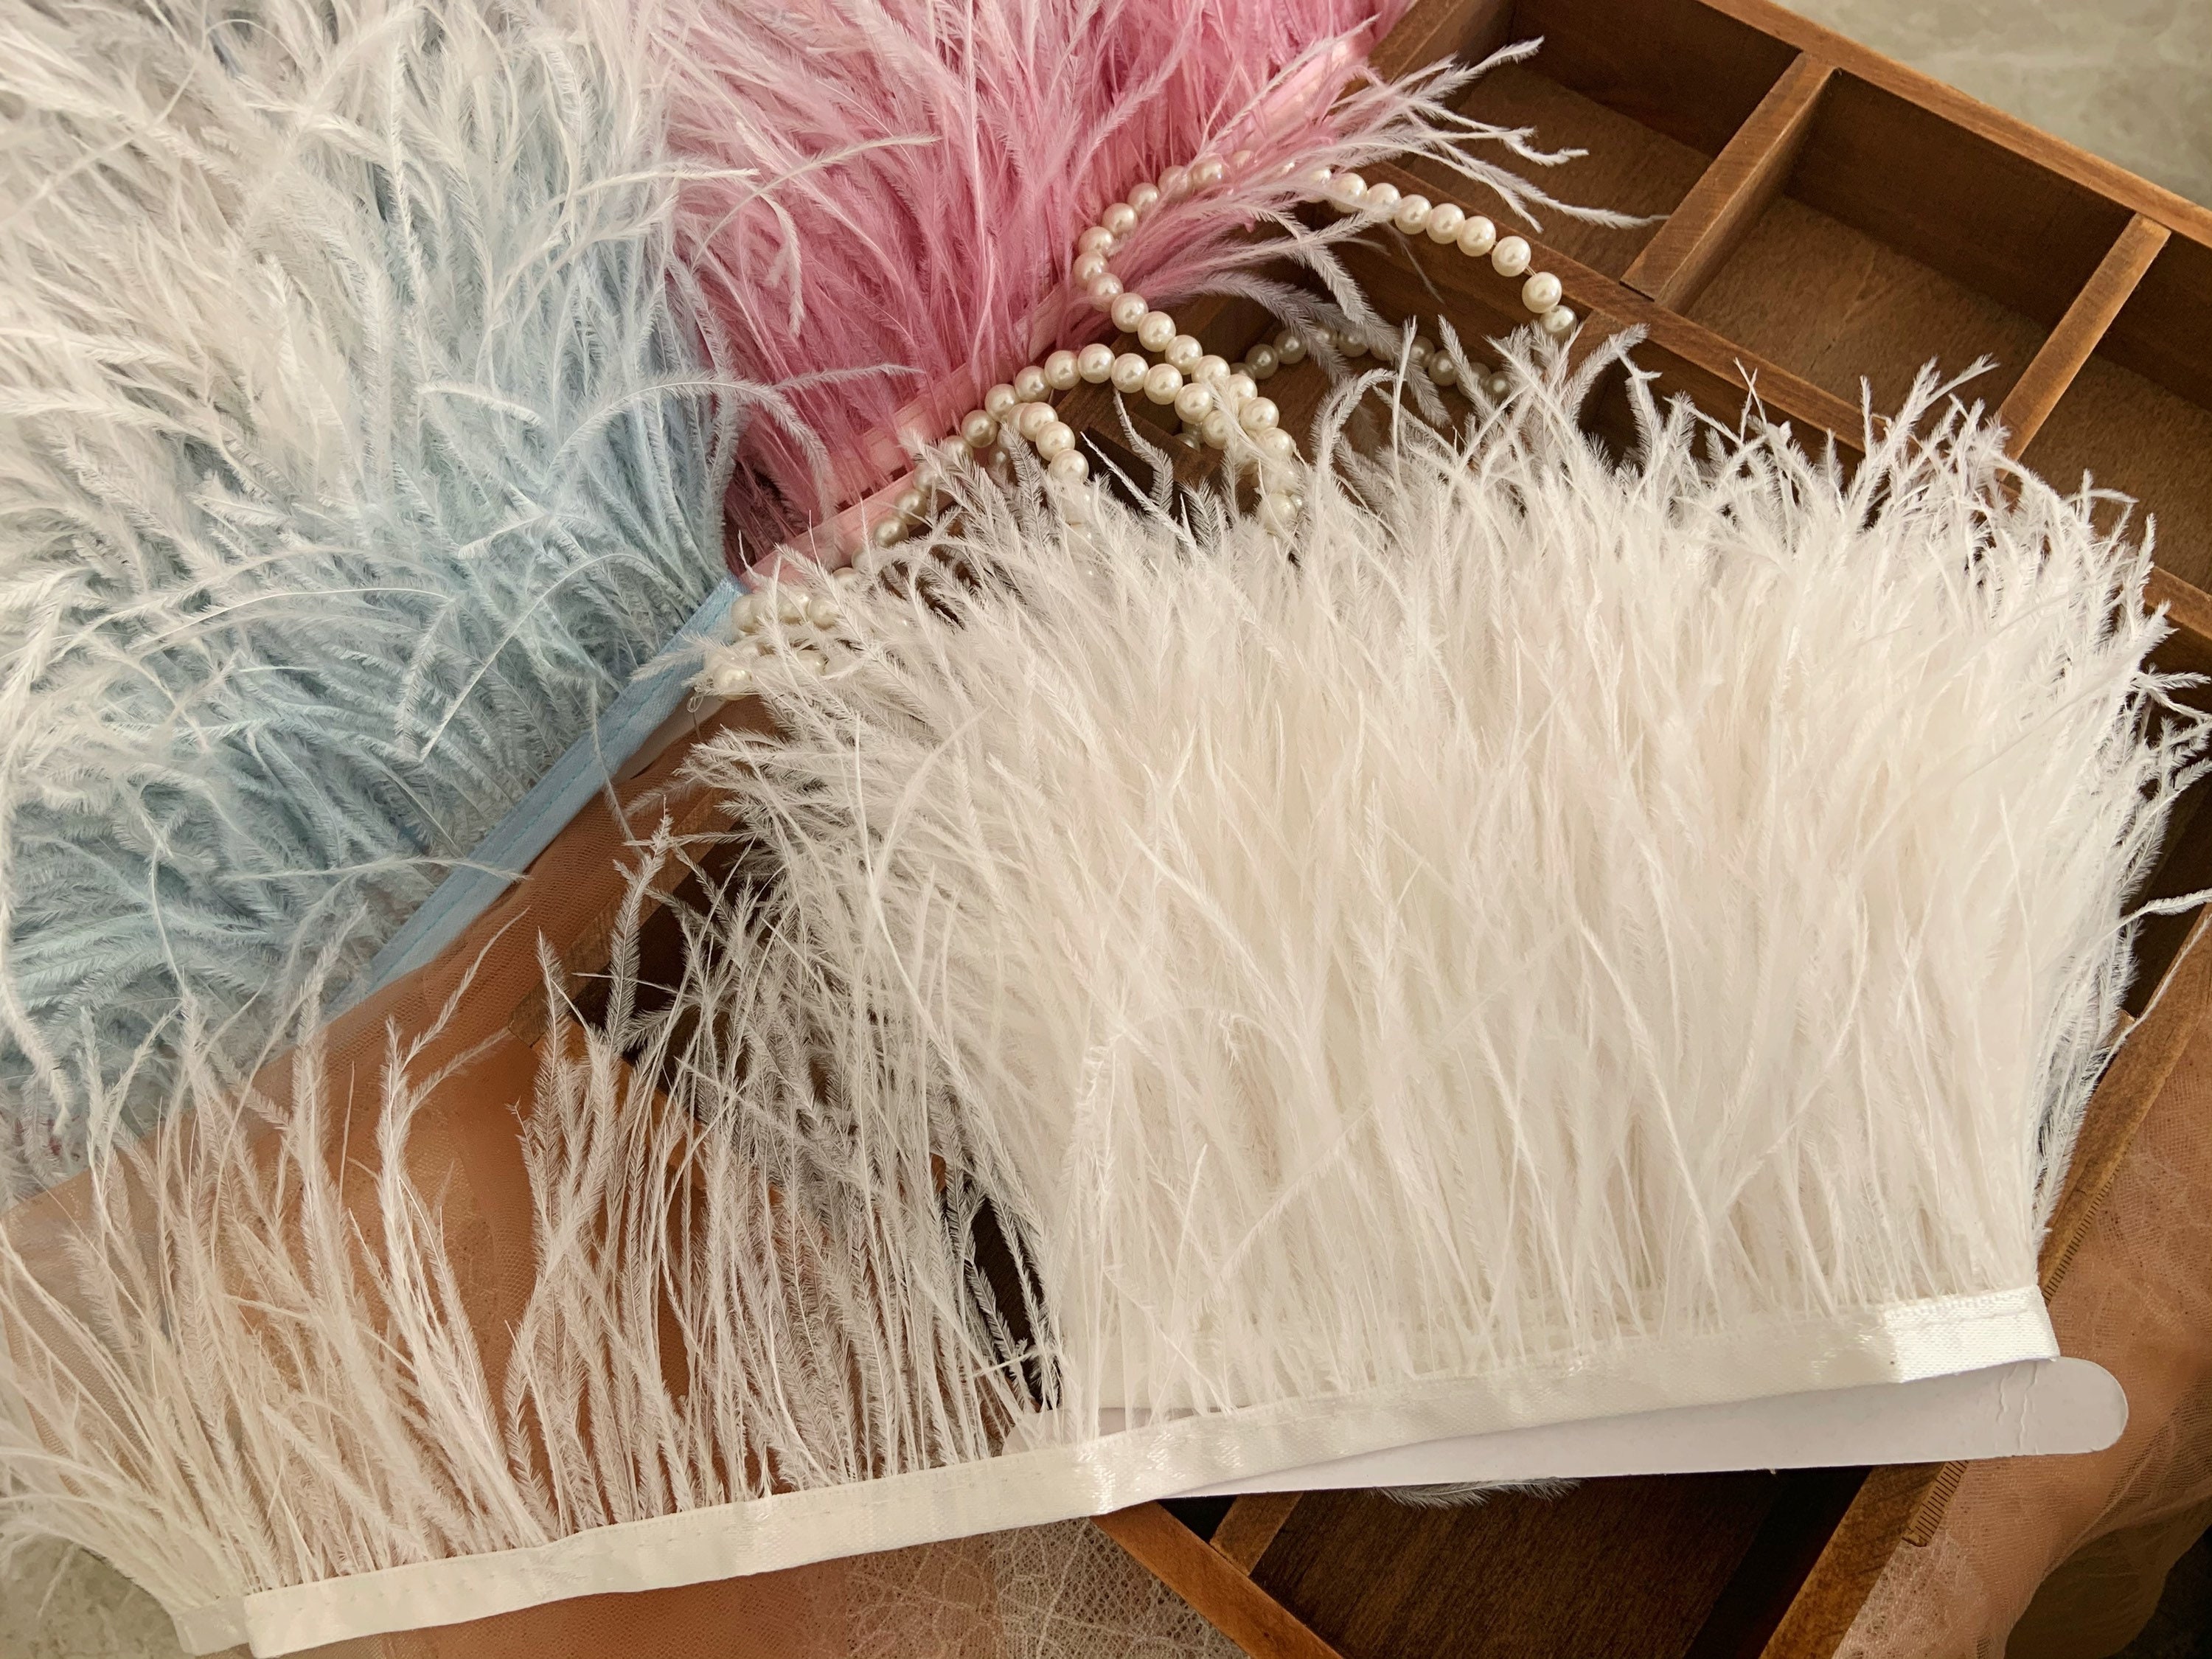 10yards Ostrich Feathers Trim 8-10 Cm Plumes Ribbon Selvage For Diy Wedding  Dress Decoration Crafts Accessories Wholesale